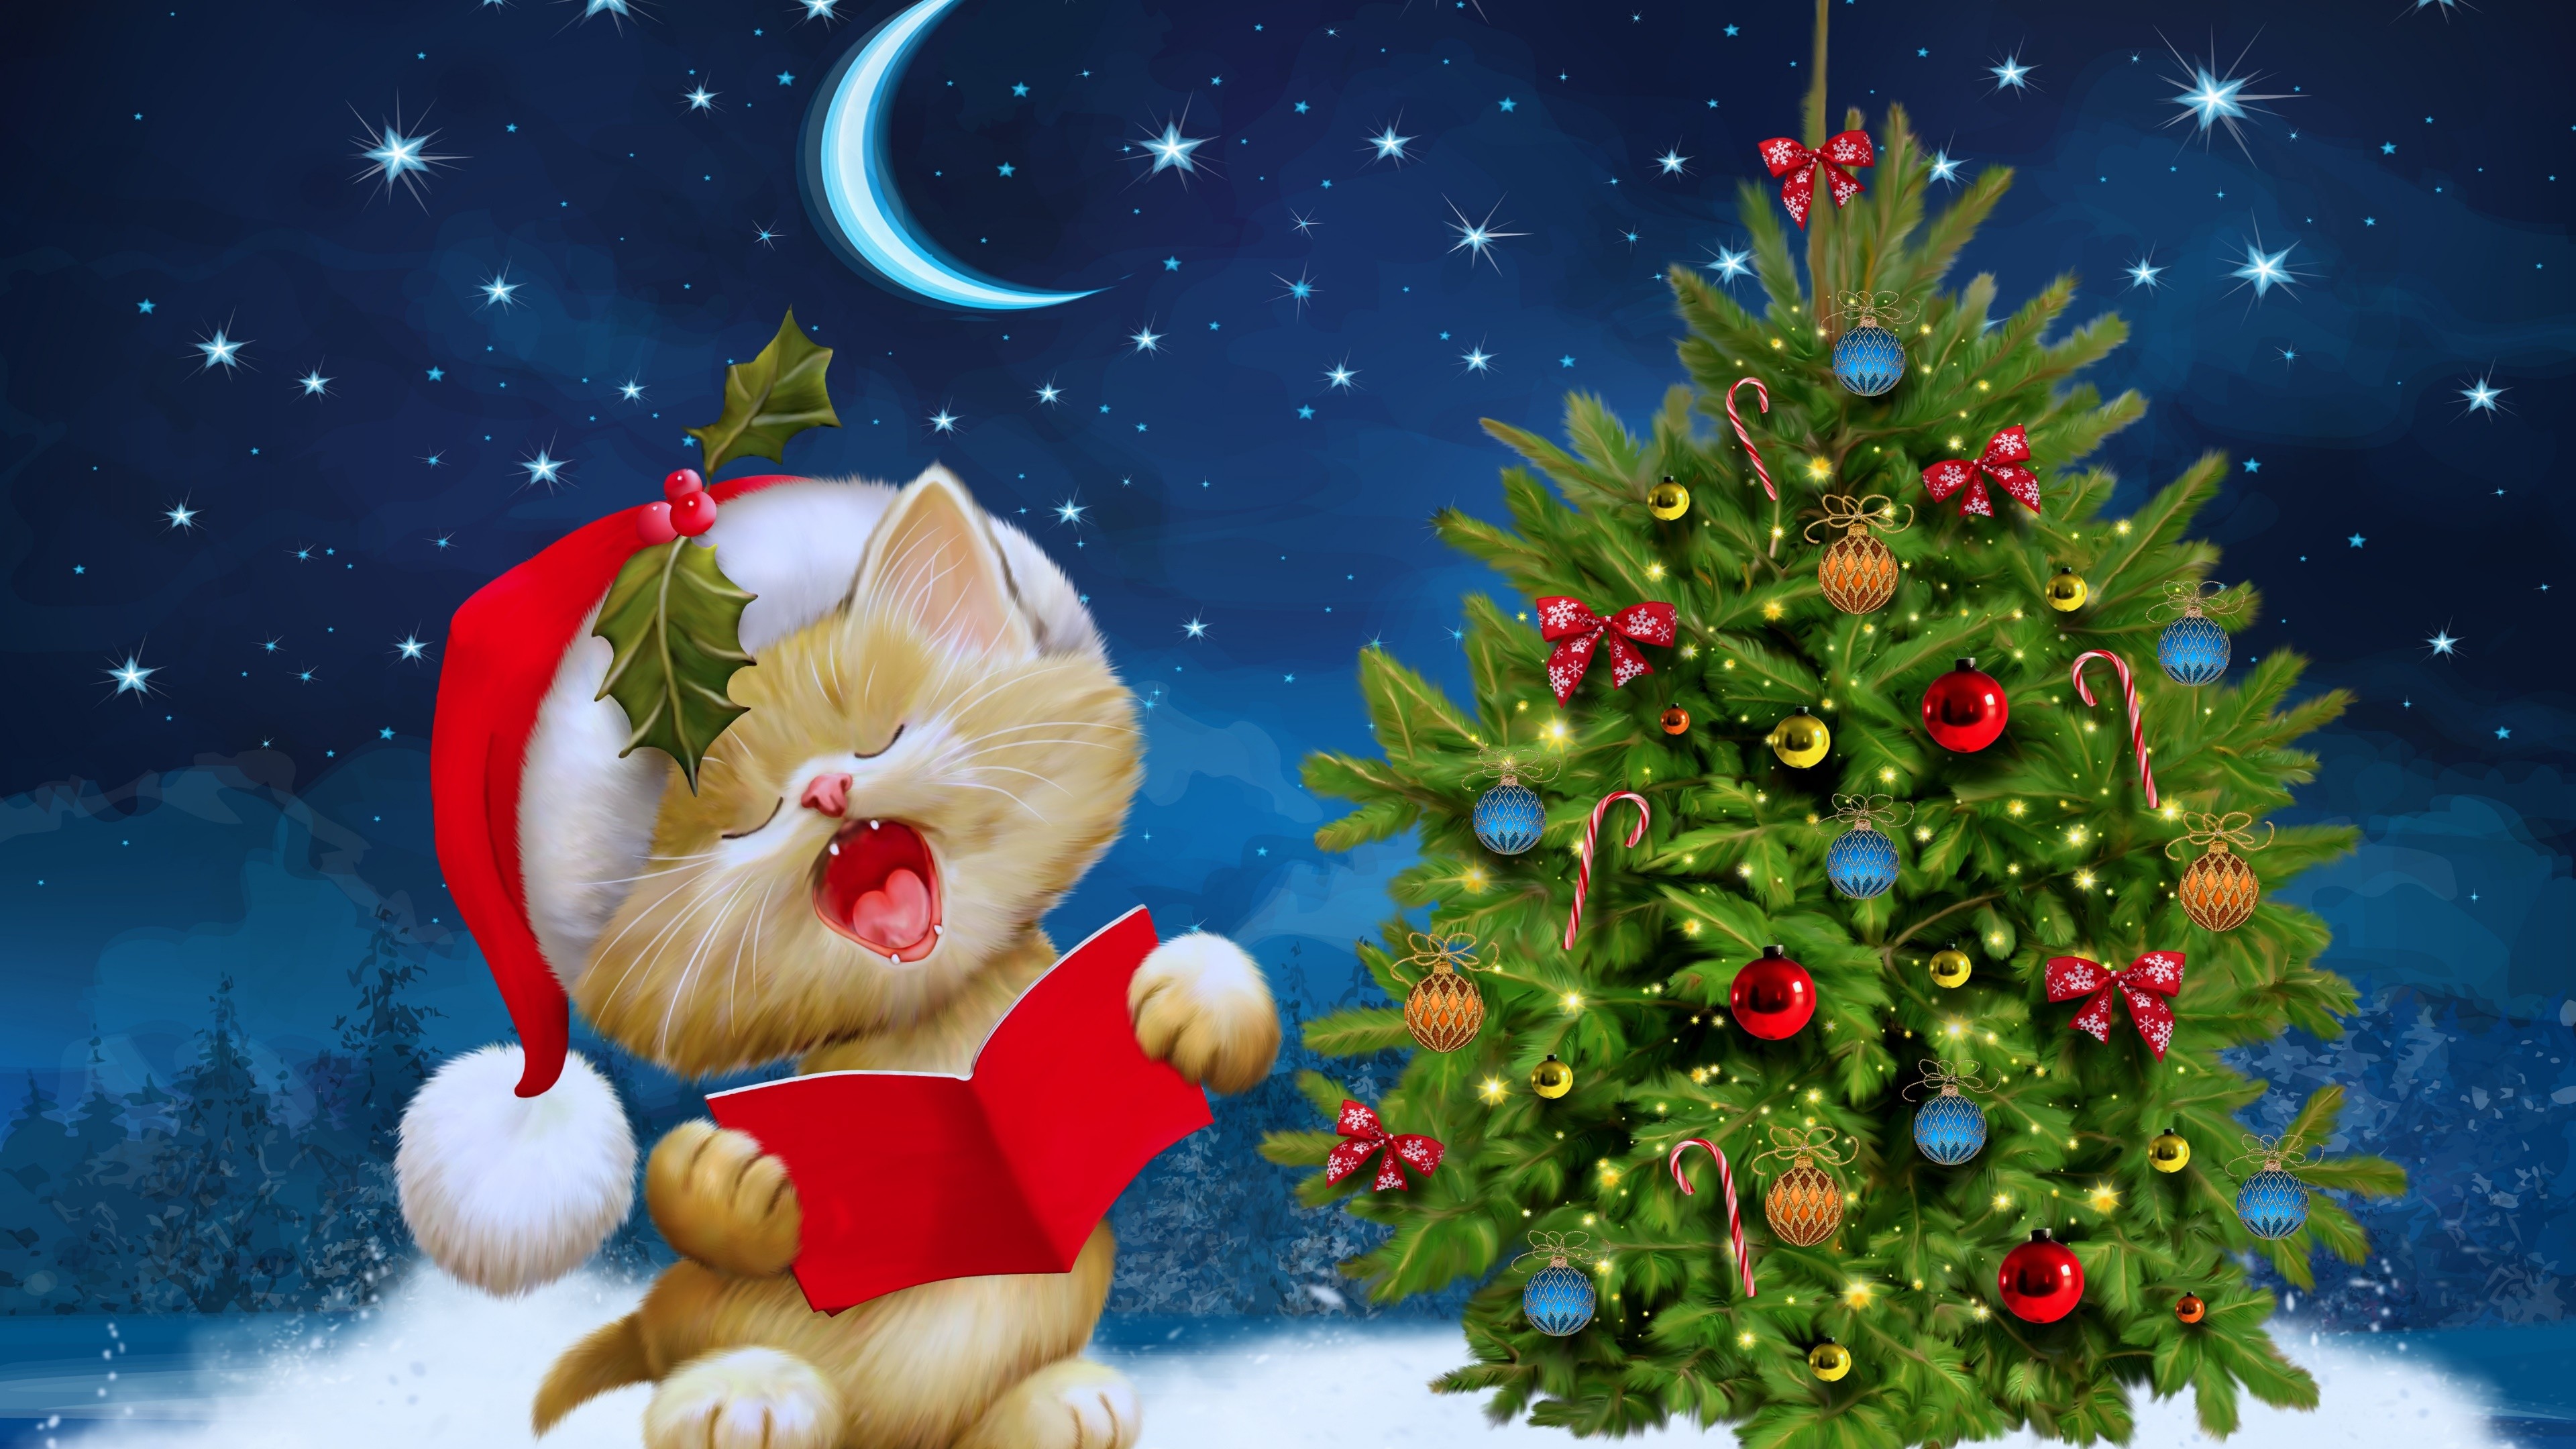 3840x2160 Awesome Hello Kitty Christmas Pictures | Hello Kitty Christmas Wallpapers